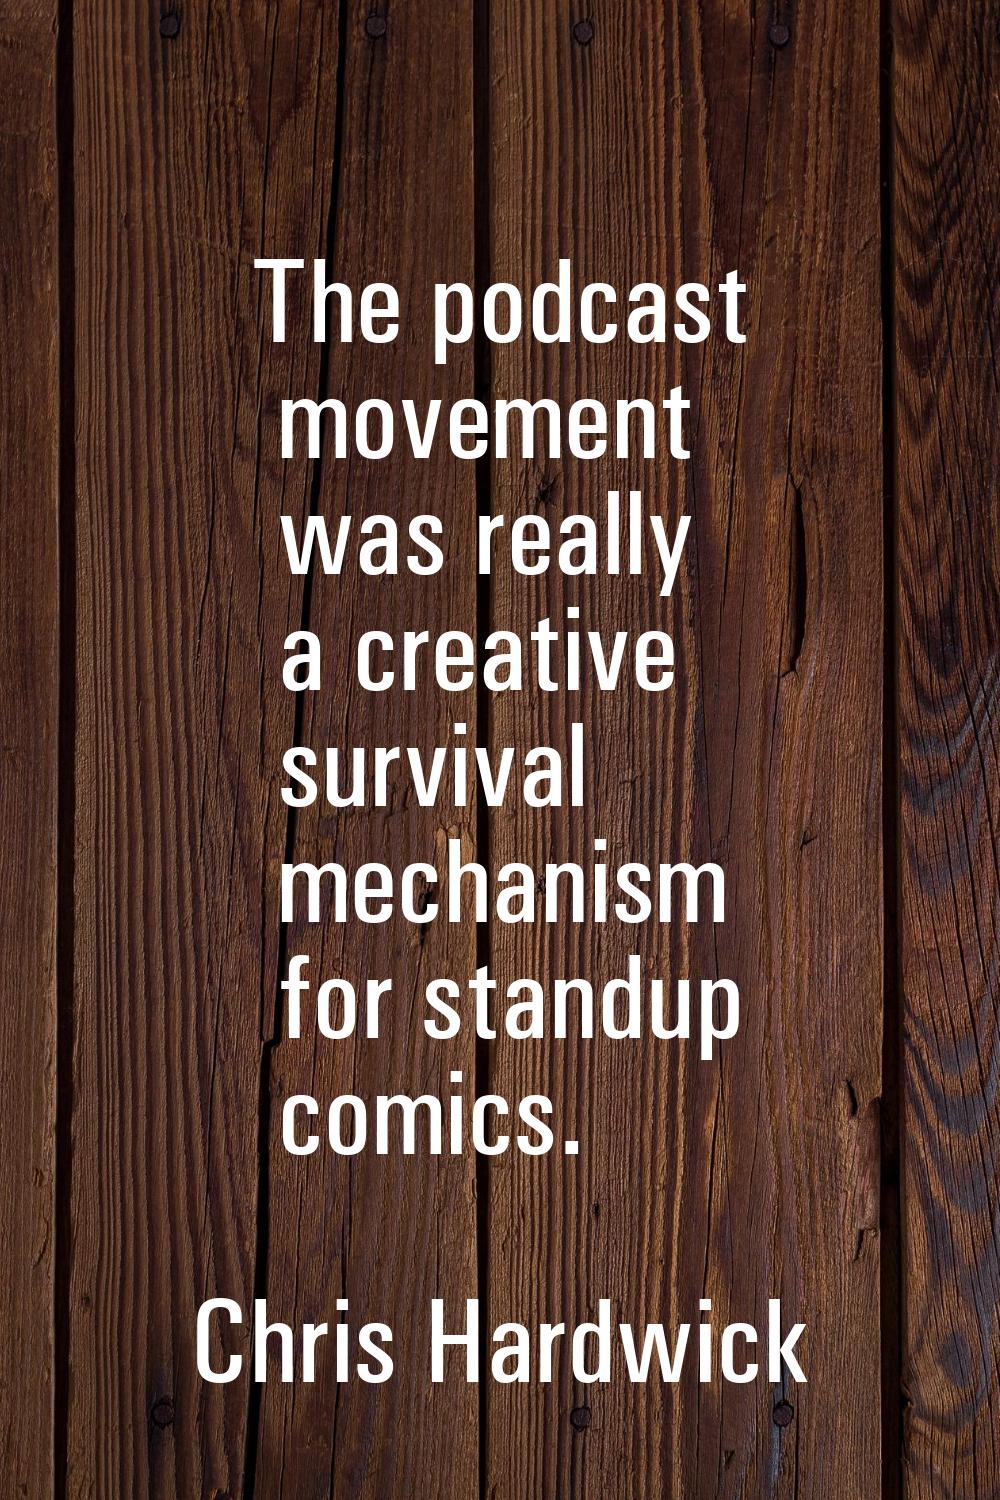 The podcast movement was really a creative survival mechanism for standup comics.